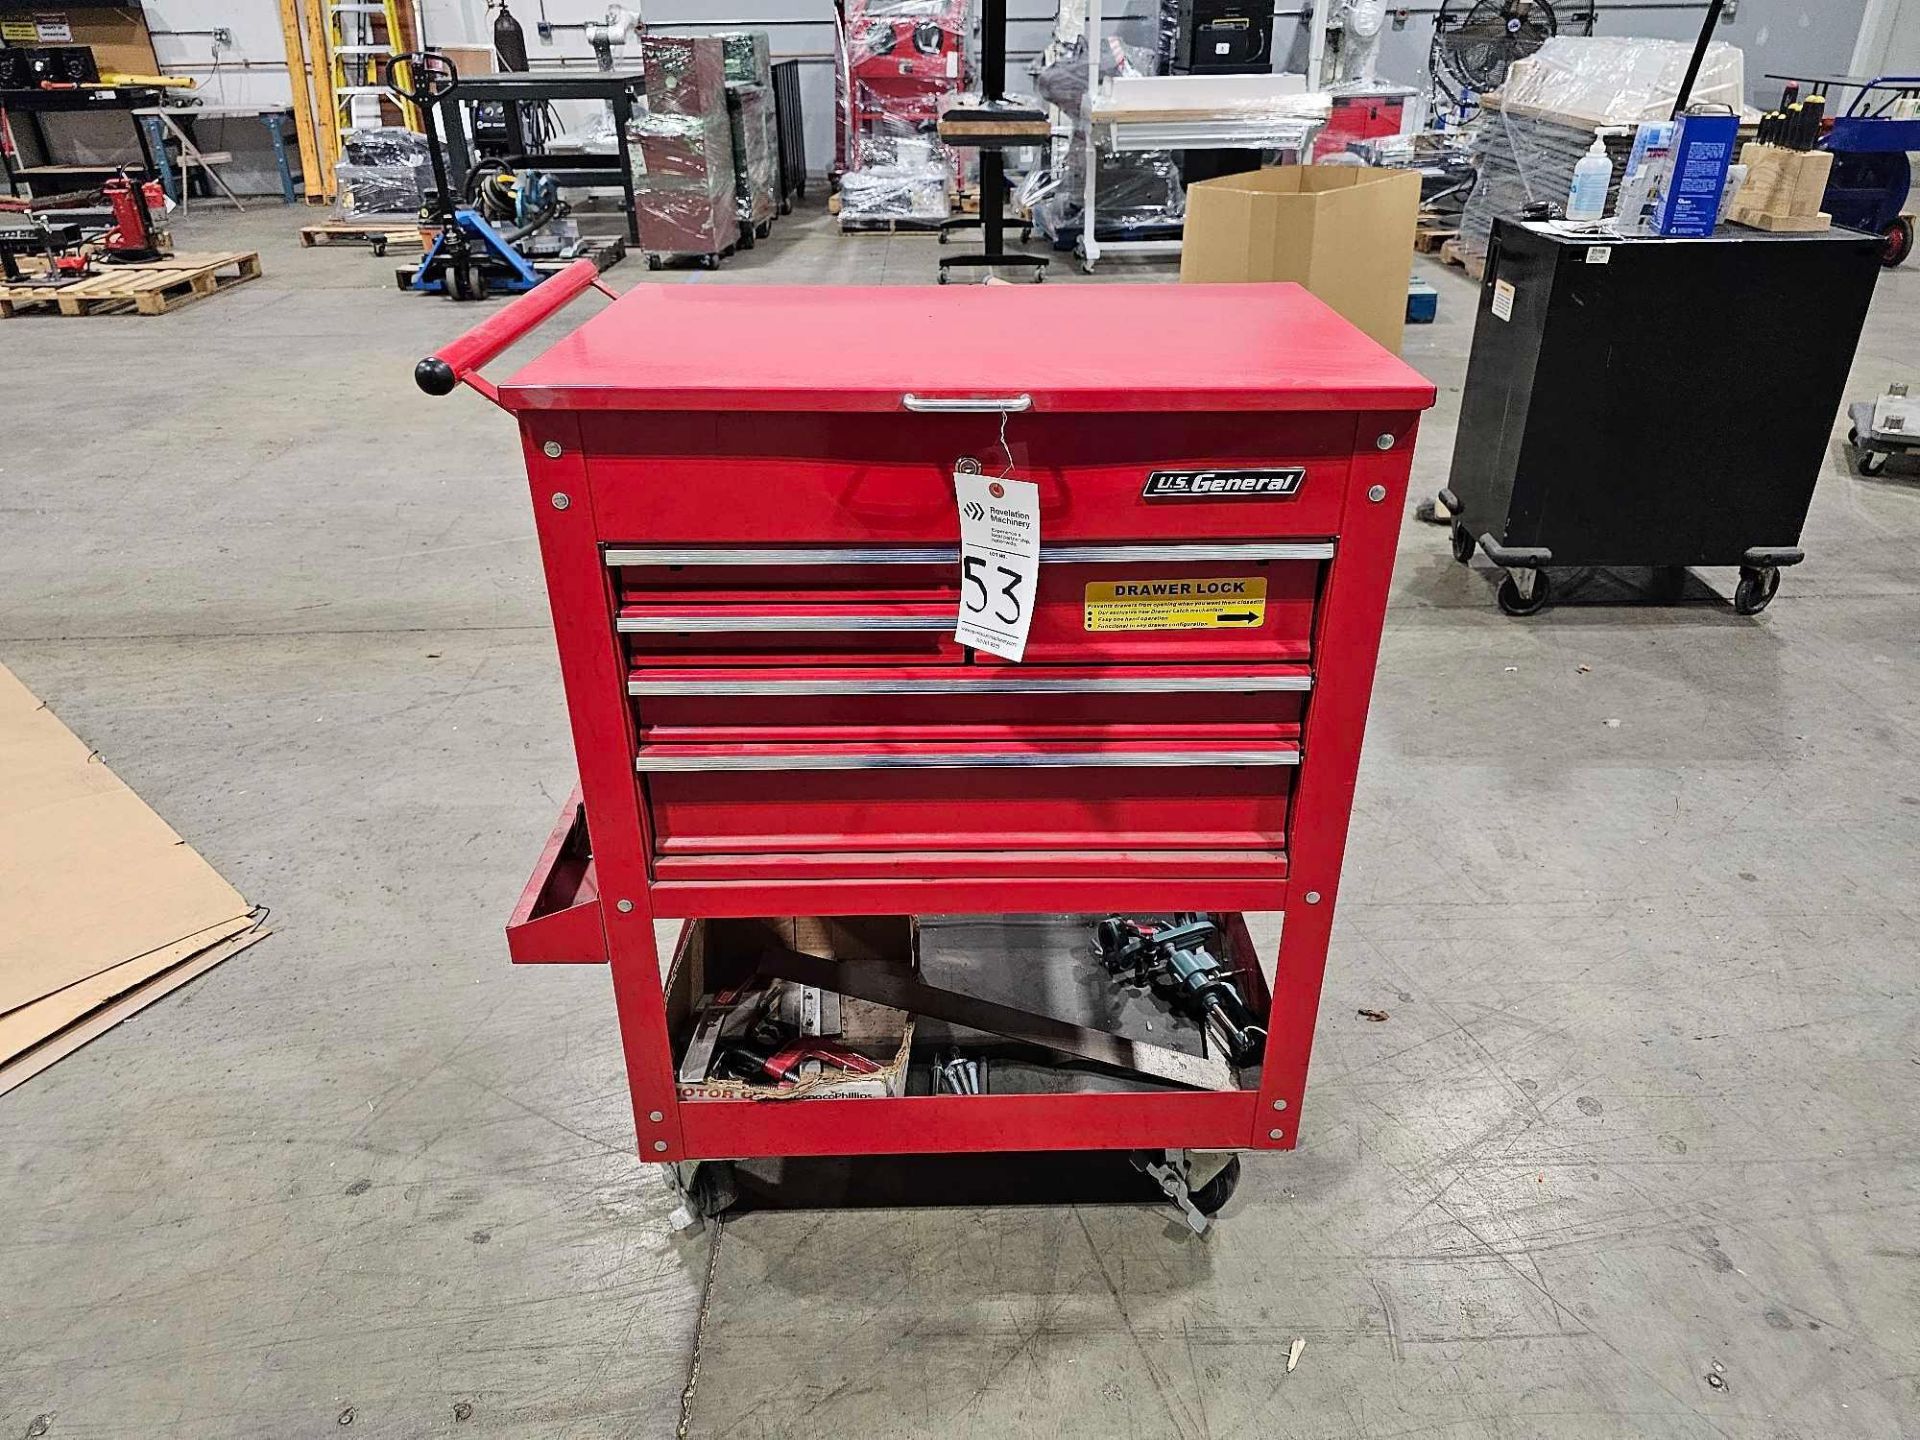 US GENERAL TOOL BOX LOADED WITH TOOLS